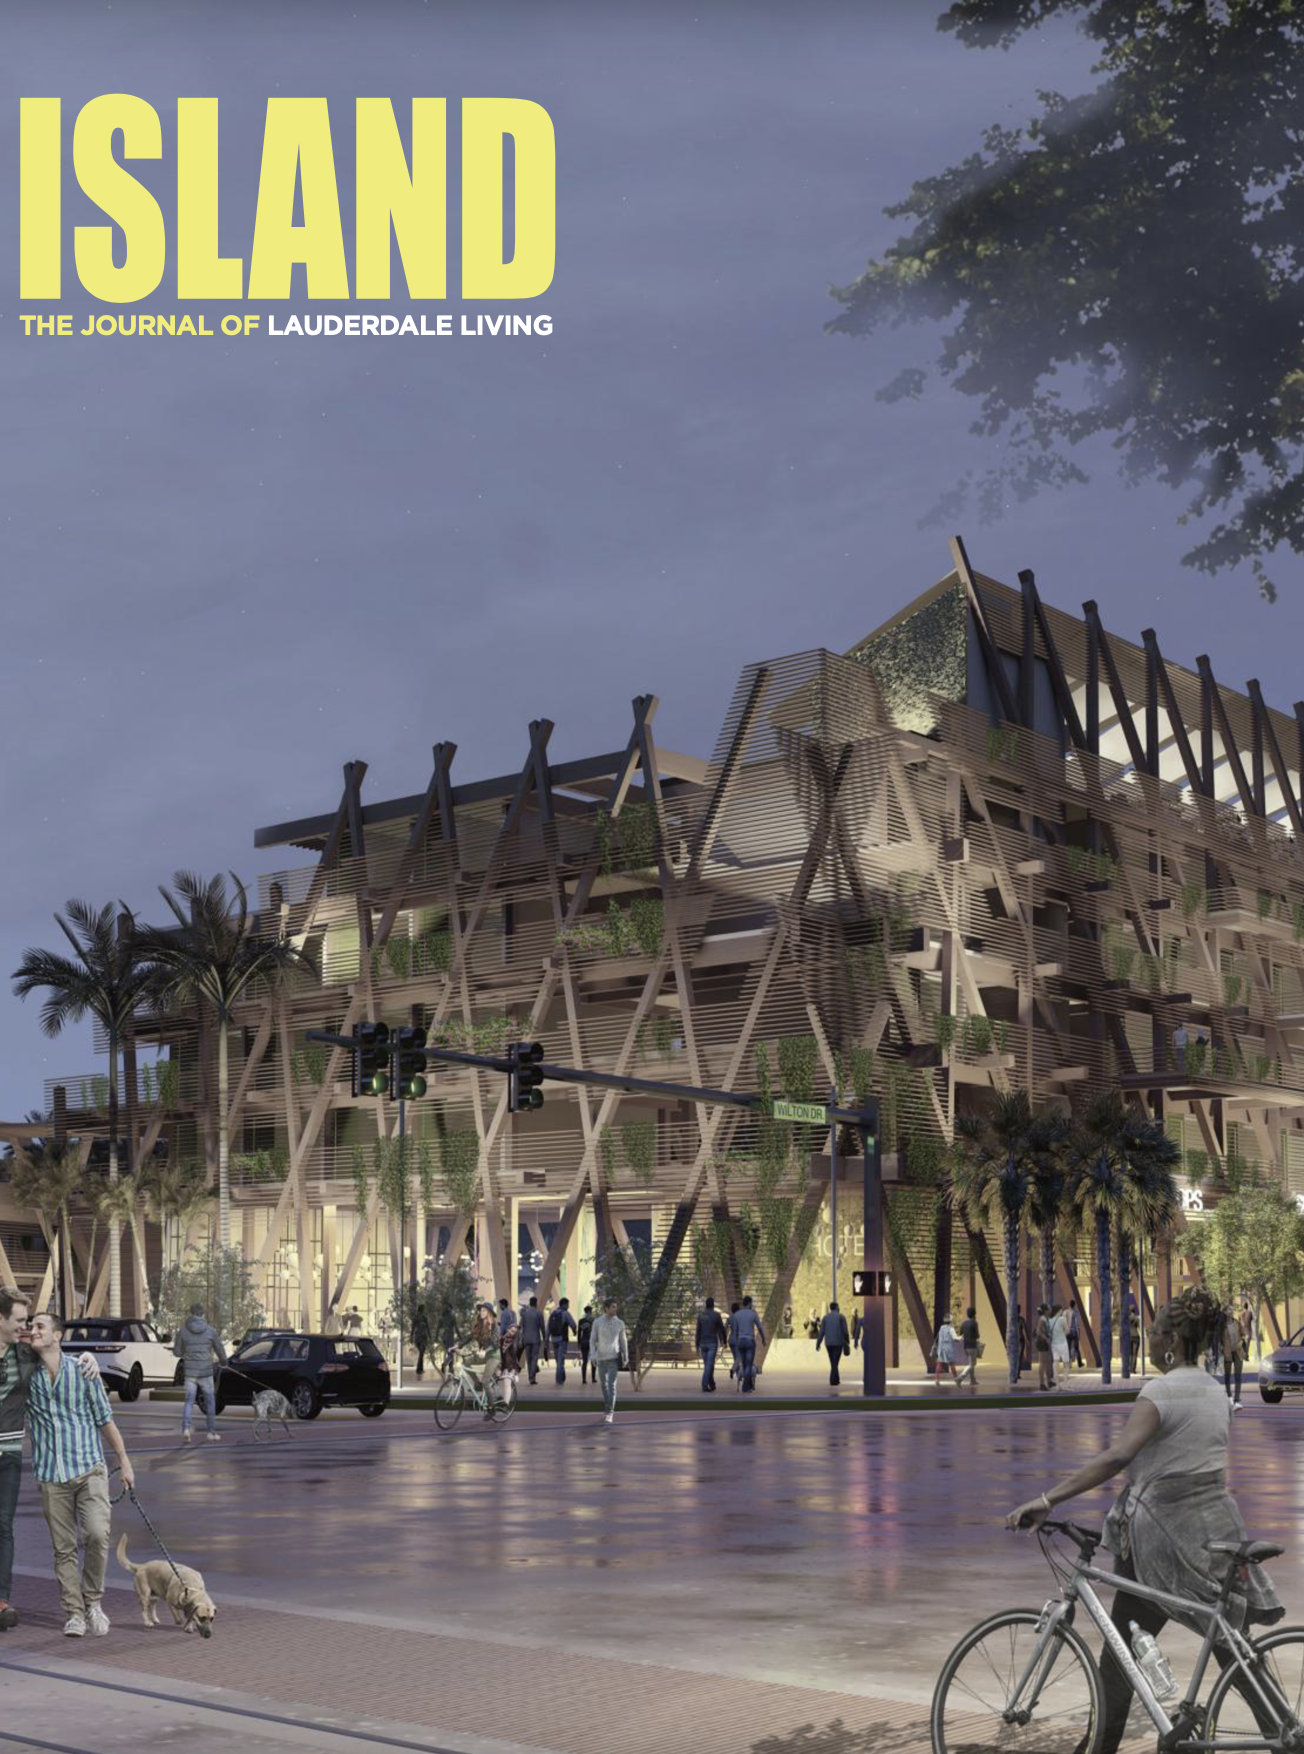 Island The Journal of Lauderdale Living